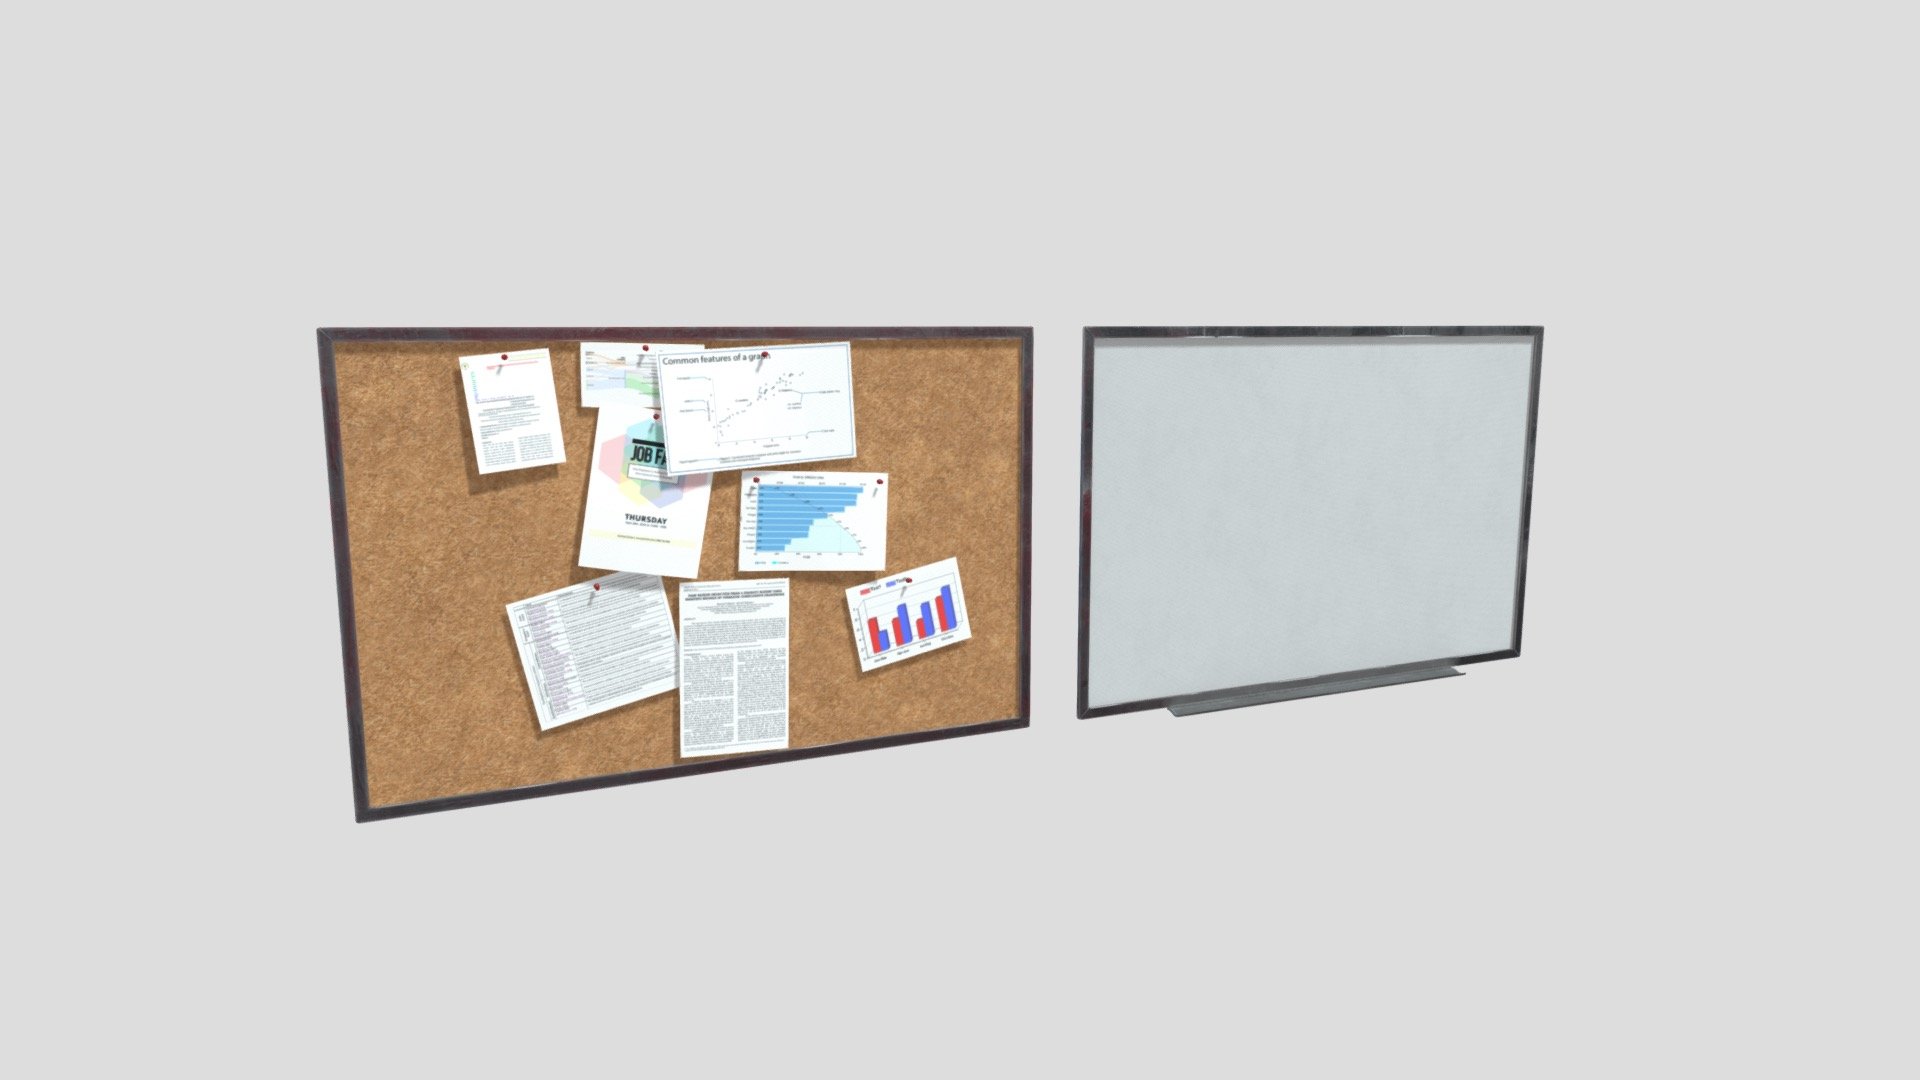 This white board and Tack board is perfect for any scene, whether its, an office, factory, facility, home, school, etc. The model is viewable from all angles and distances and can easily be customized with perfect UV maps.

This Includes:

The mesh (White board, Tack board, Thumbtack, Papers)
2K texture Set (Albedo, Metallic, Roughness, Normal, Height)
4 Texture Sets ( White Board, Dirty White board, Tack Board, Papers, Thumbtack)
The meshes are UV unwrapped with vertex colors for easy retexturing 3d model